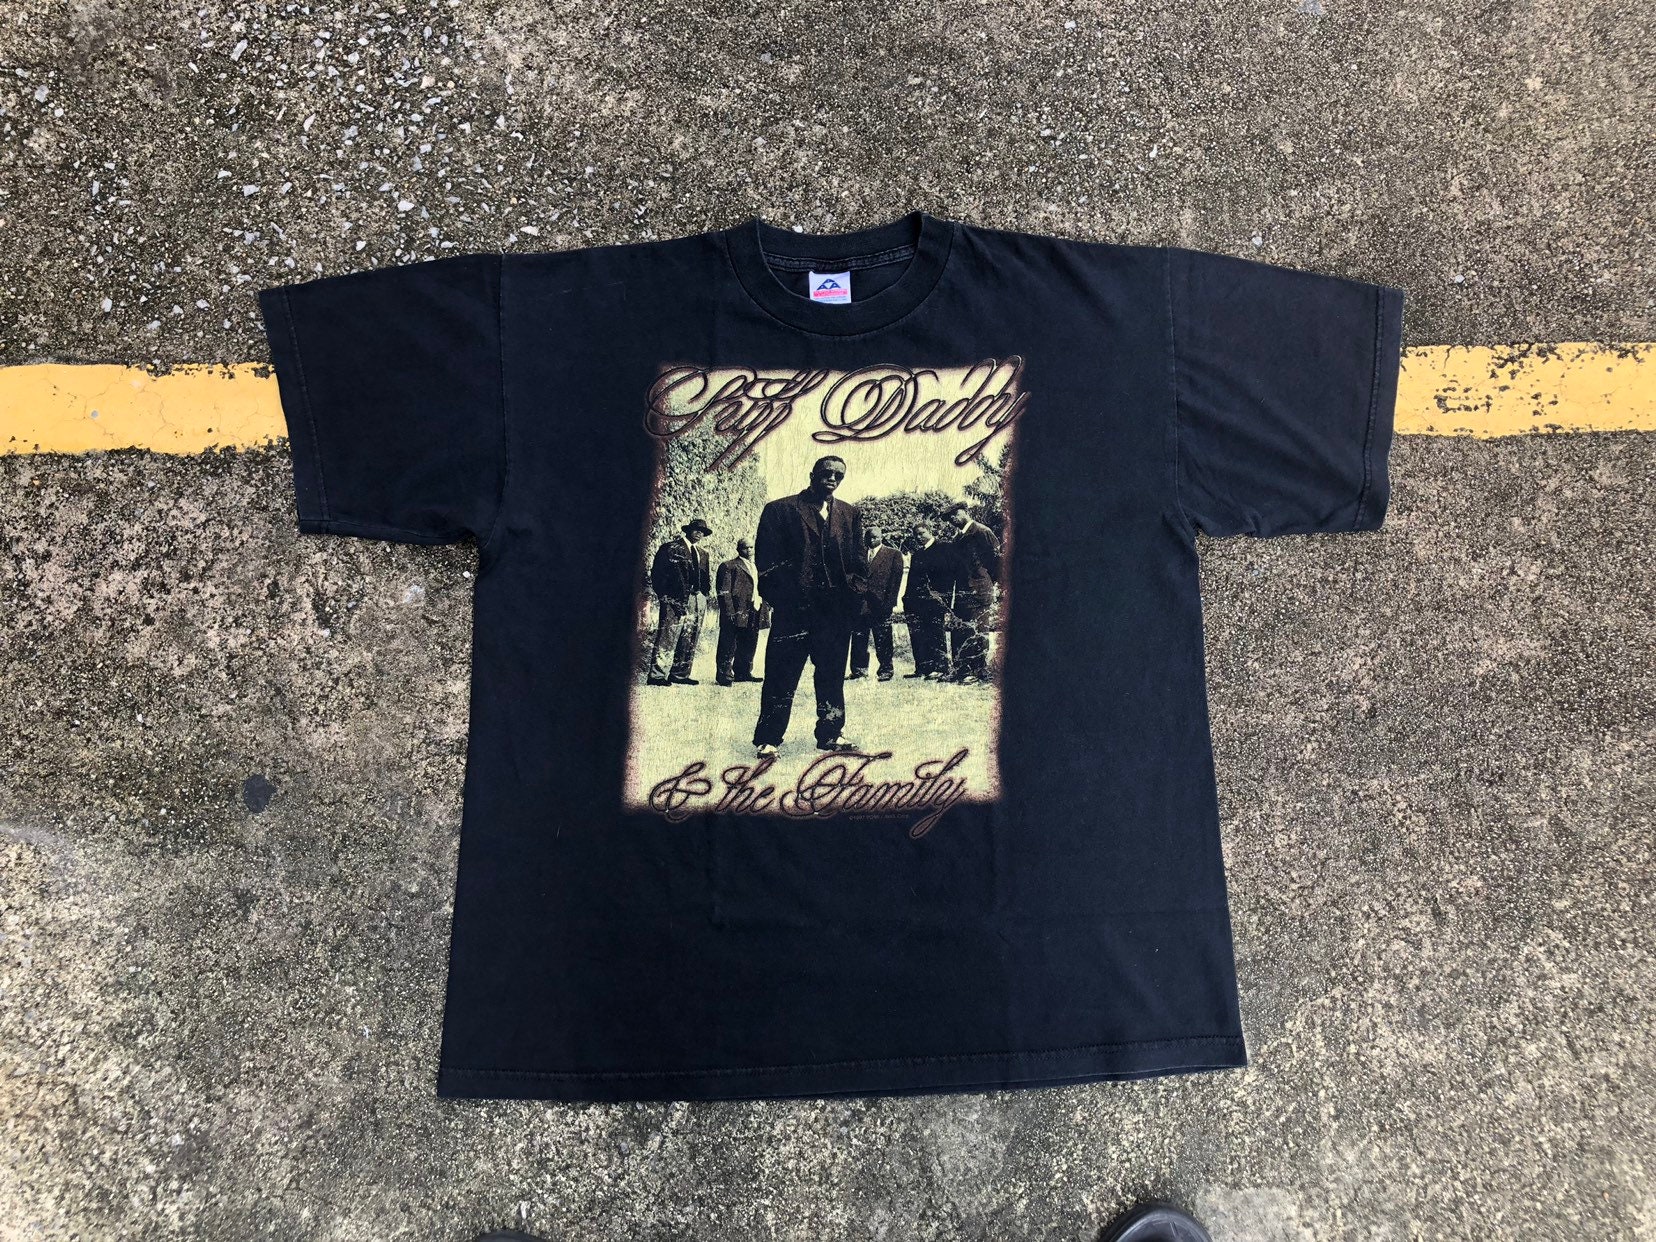 VTG Puff Daddy 1997 No Way Out Wolrd Tour T-shirt - Etsy